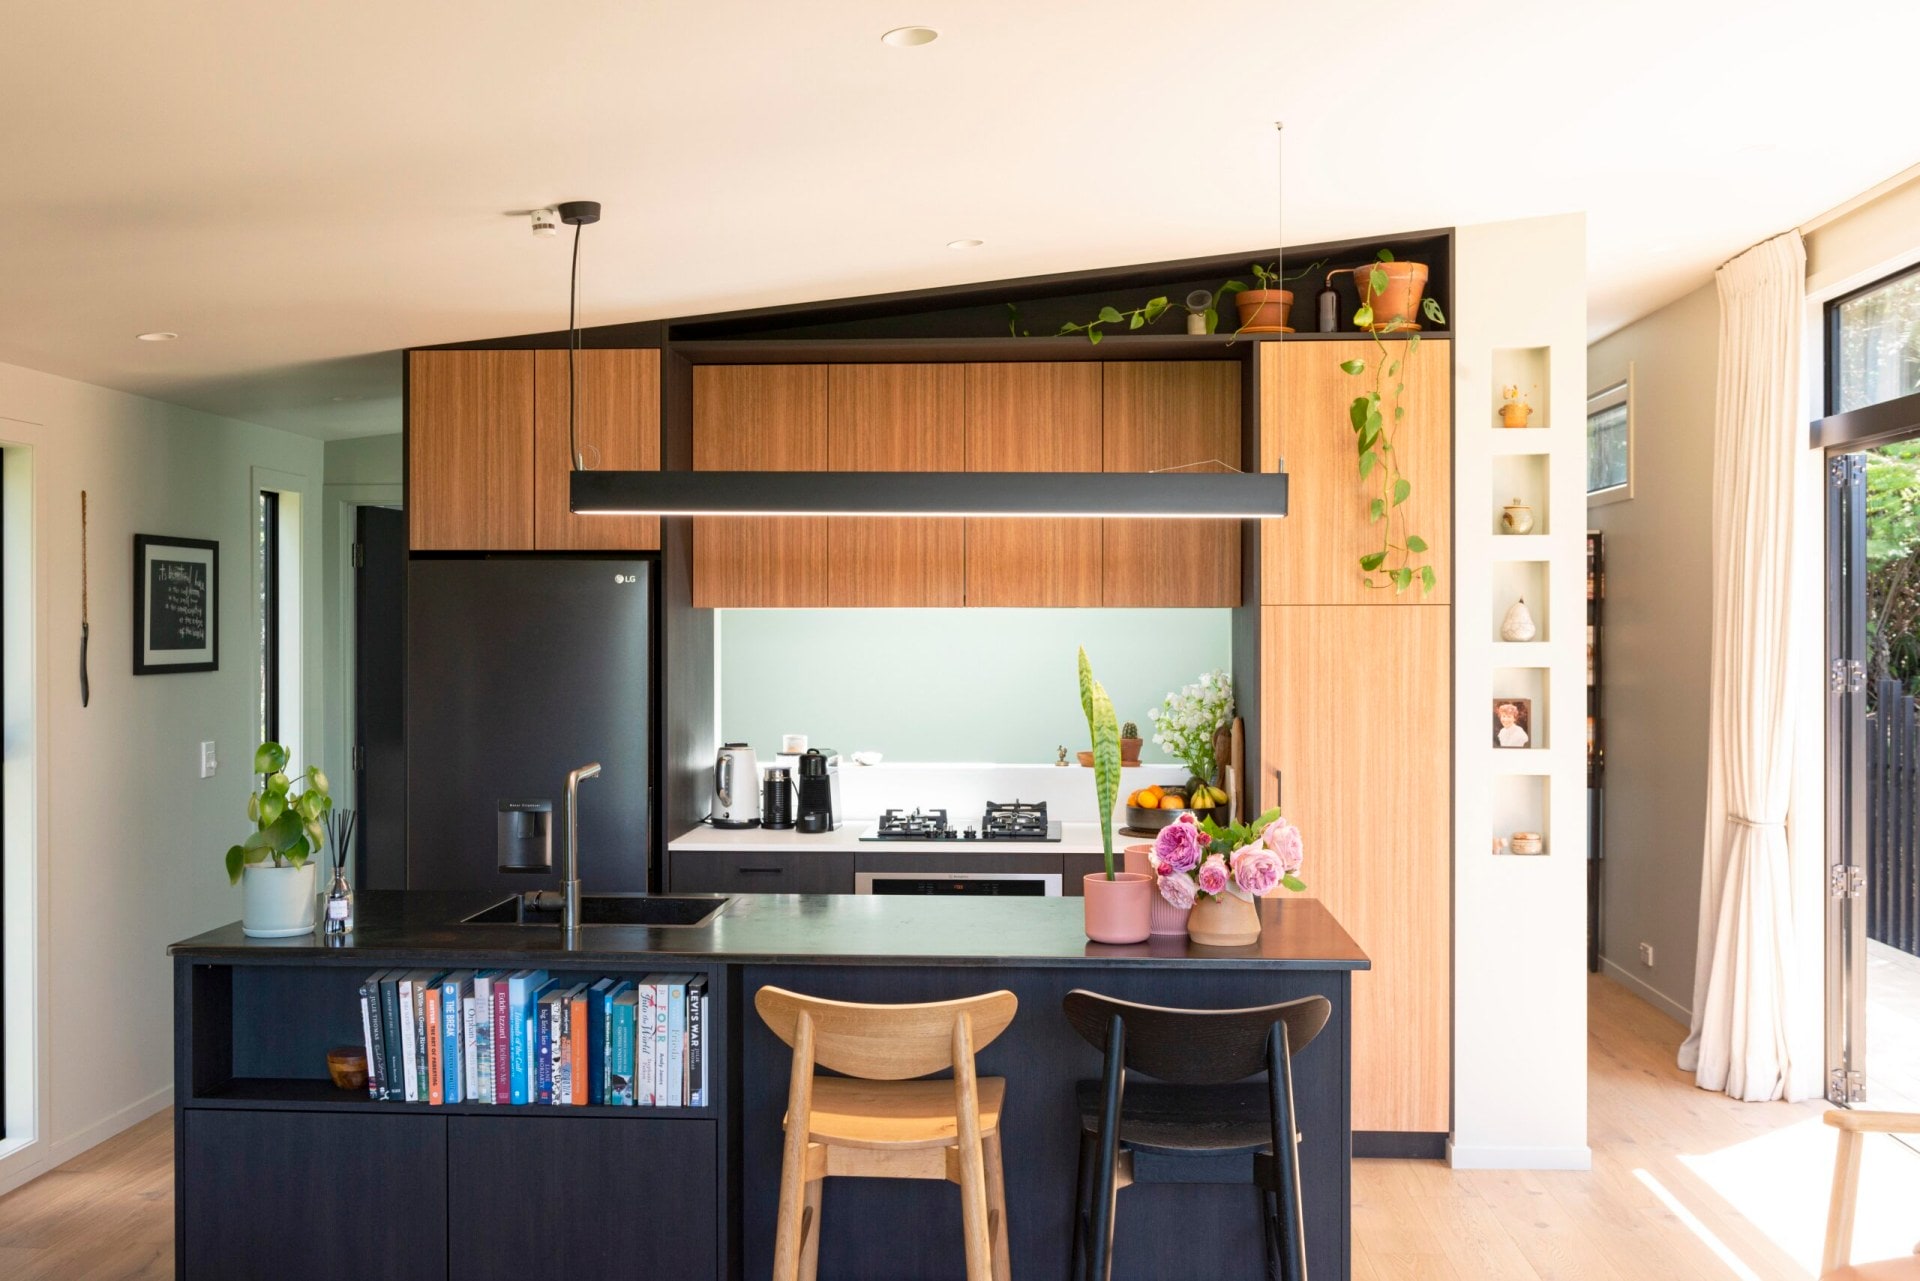 The open plan kitchen with a mix of wood and black cabinets, the ceiling is on a slight slant which comes down into the cabinetry that goes all the way to the ceiling